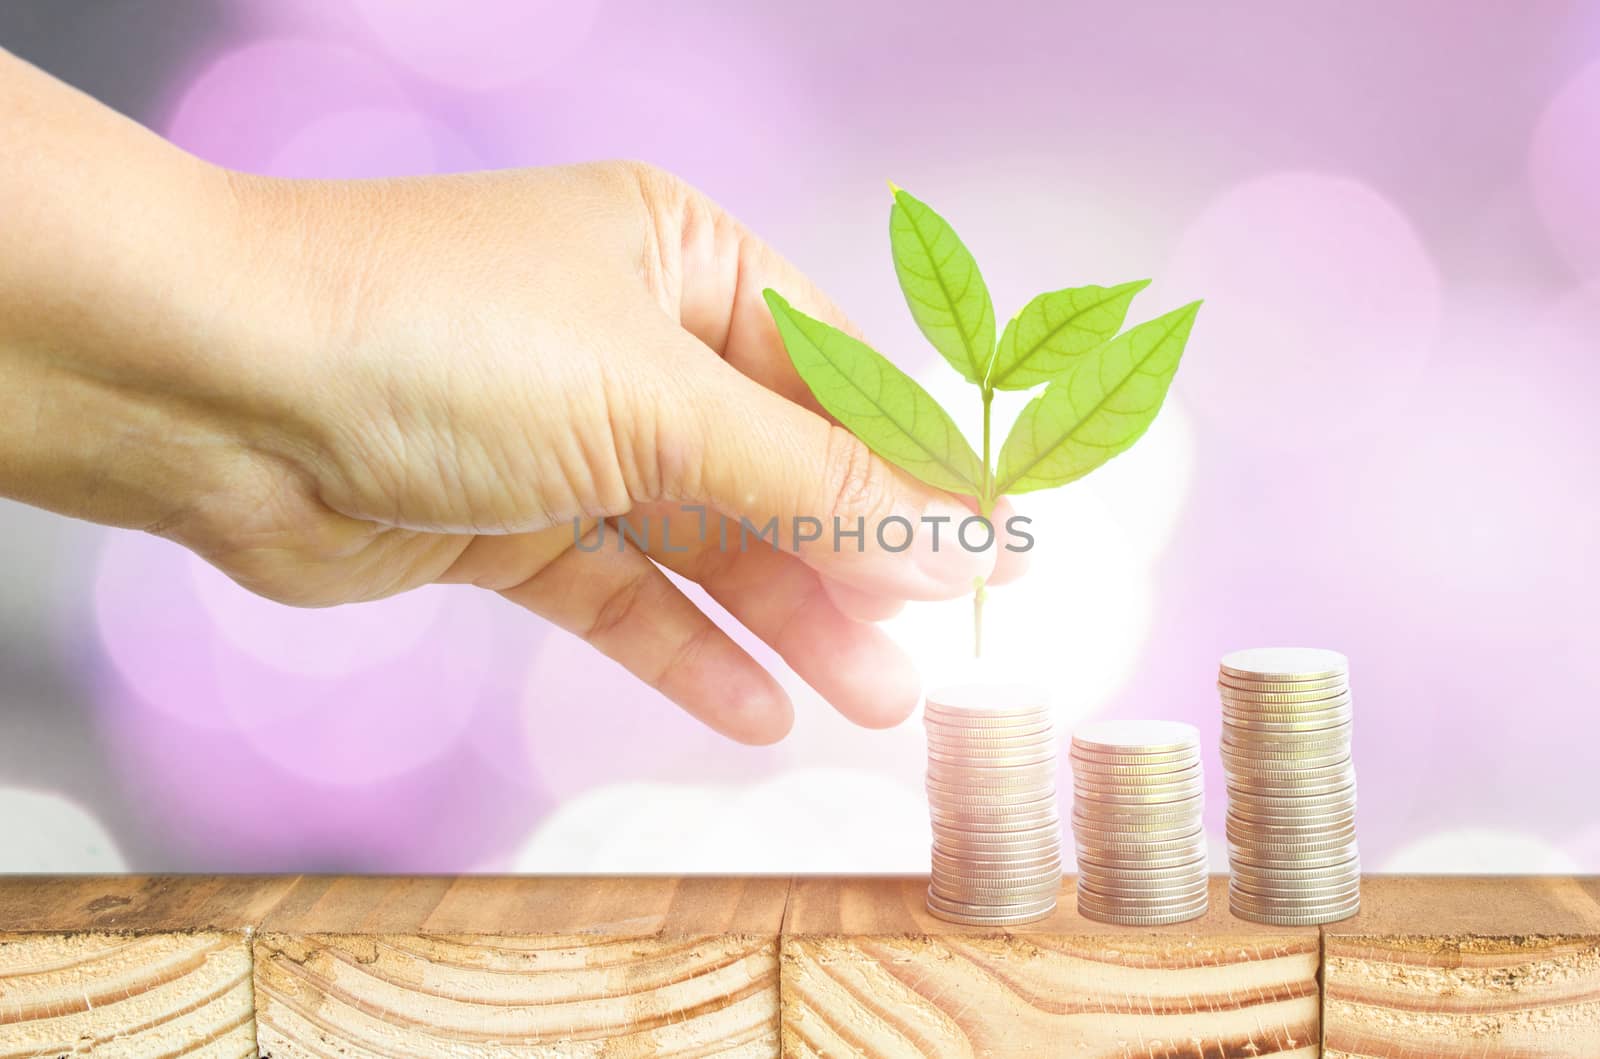 Close-Up Of Female Hand Pick Up The Leaf On The Coin With Bokeh Soft Light Blur Background ,Business Finance And Money Concept, Business Investment Growth Concept